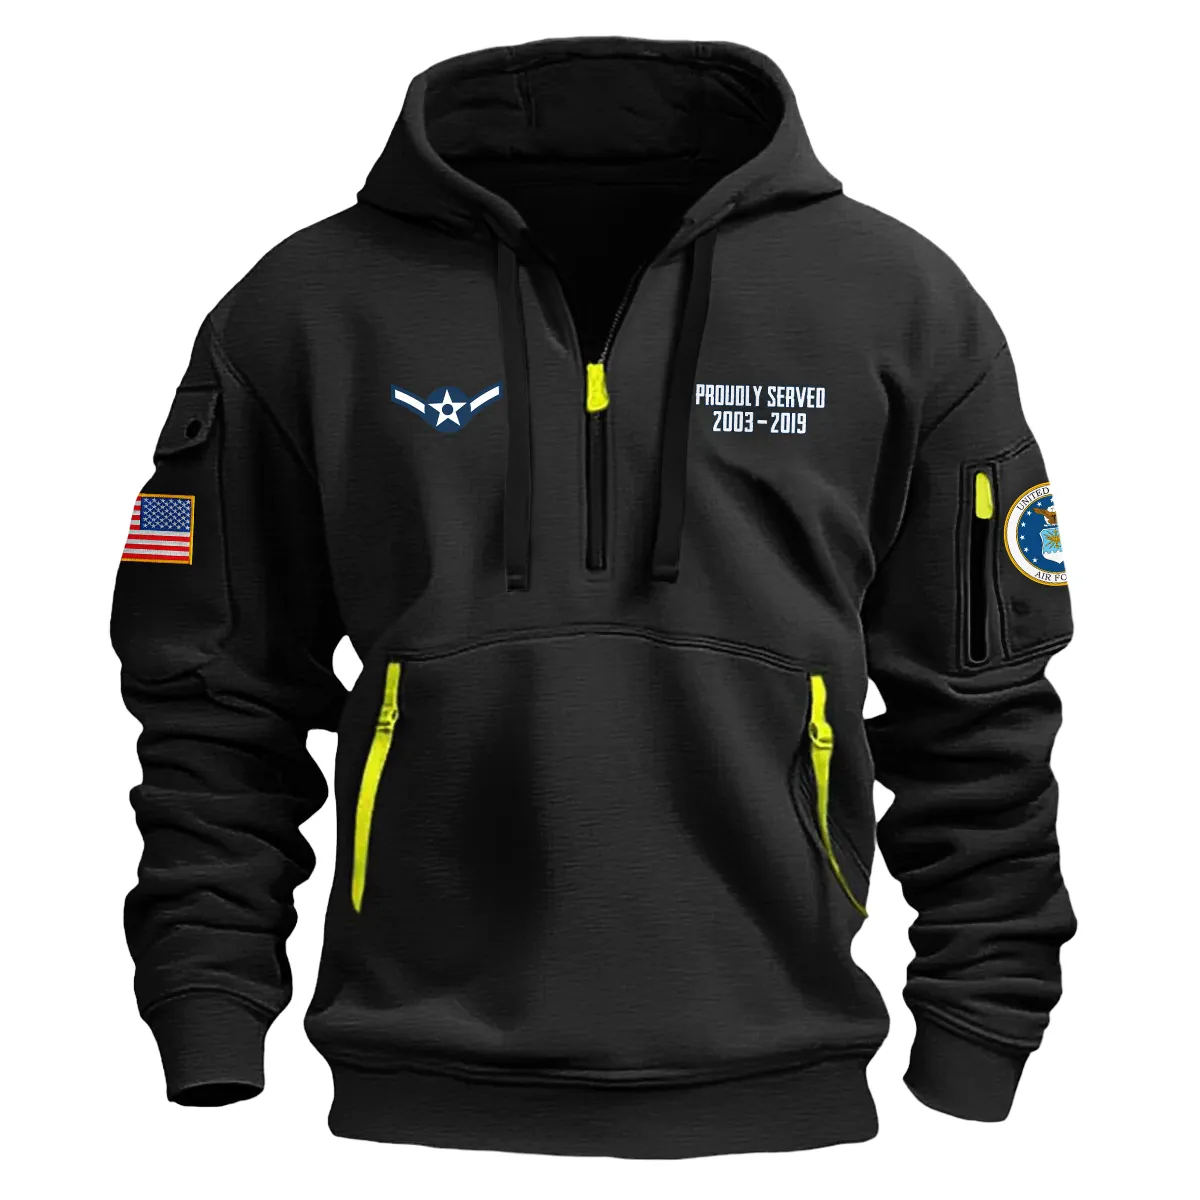 US Military All Branches! Personalized Gift E2-AMN U.S. Air Force Fashion Hoodie Half Zipper